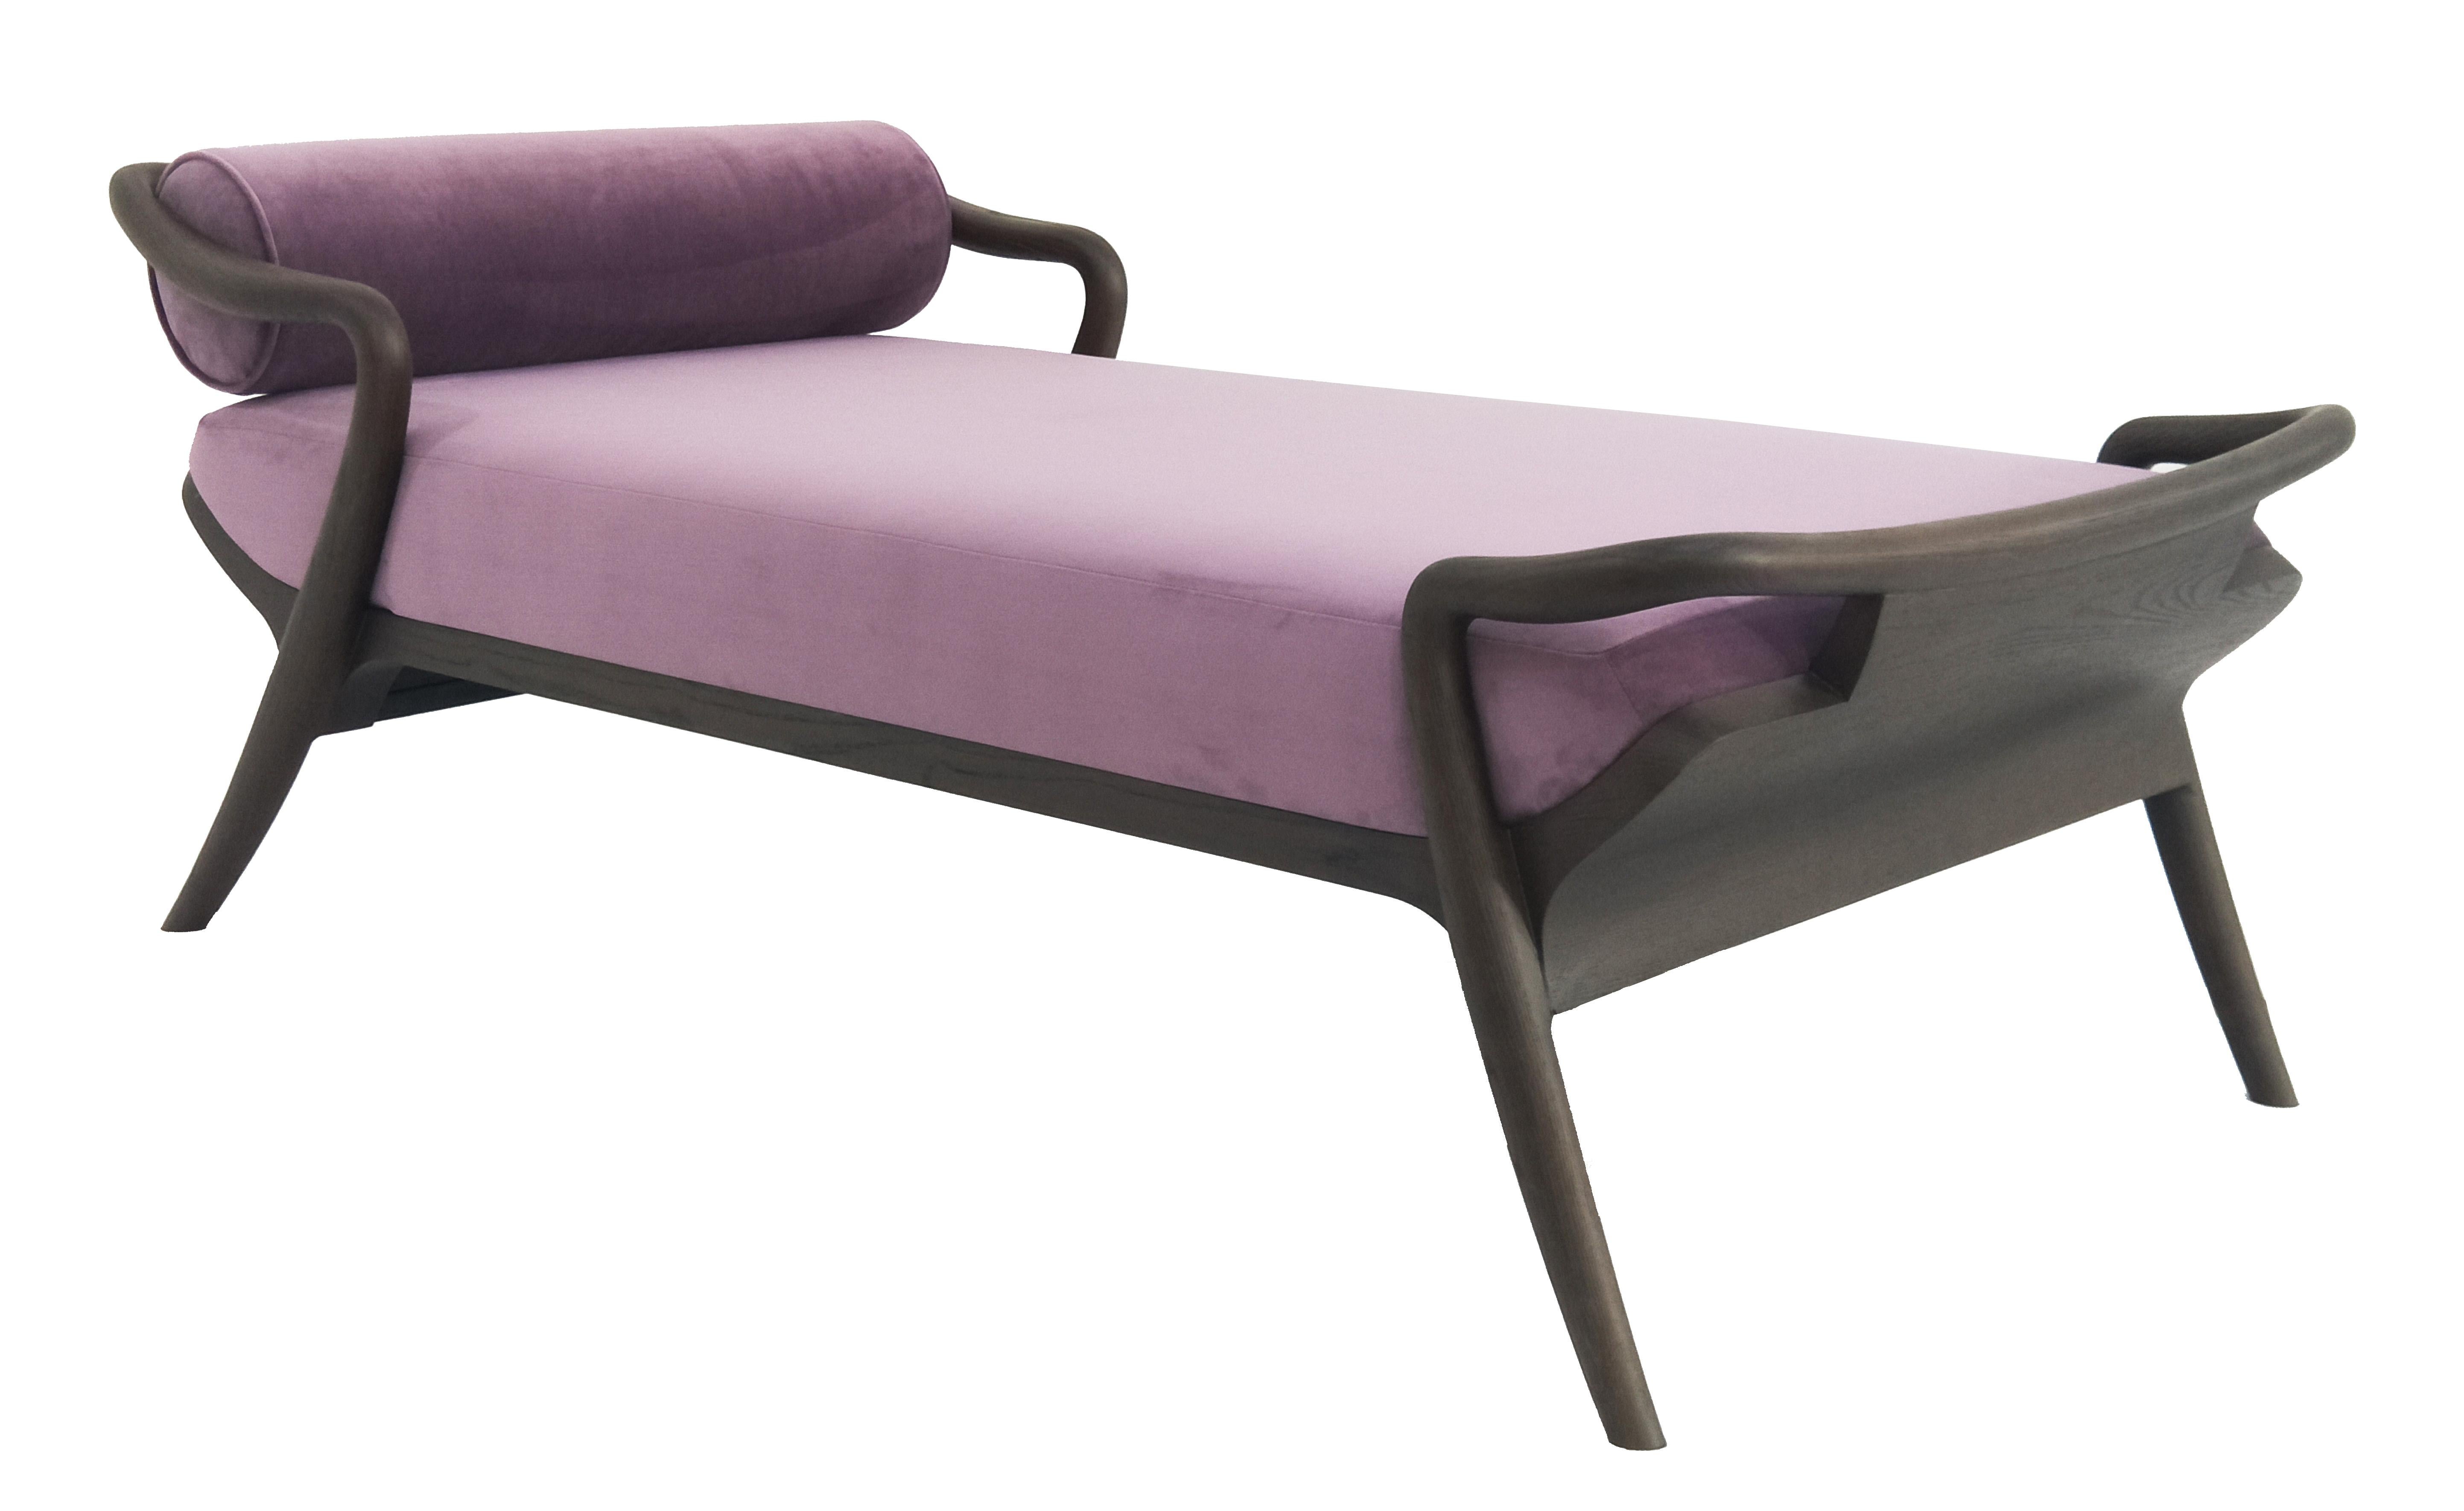 Chinois Chaise Longue Day Bed Bench Mid Century Rhythm André Fu Oak Plum Upholstered New en vente